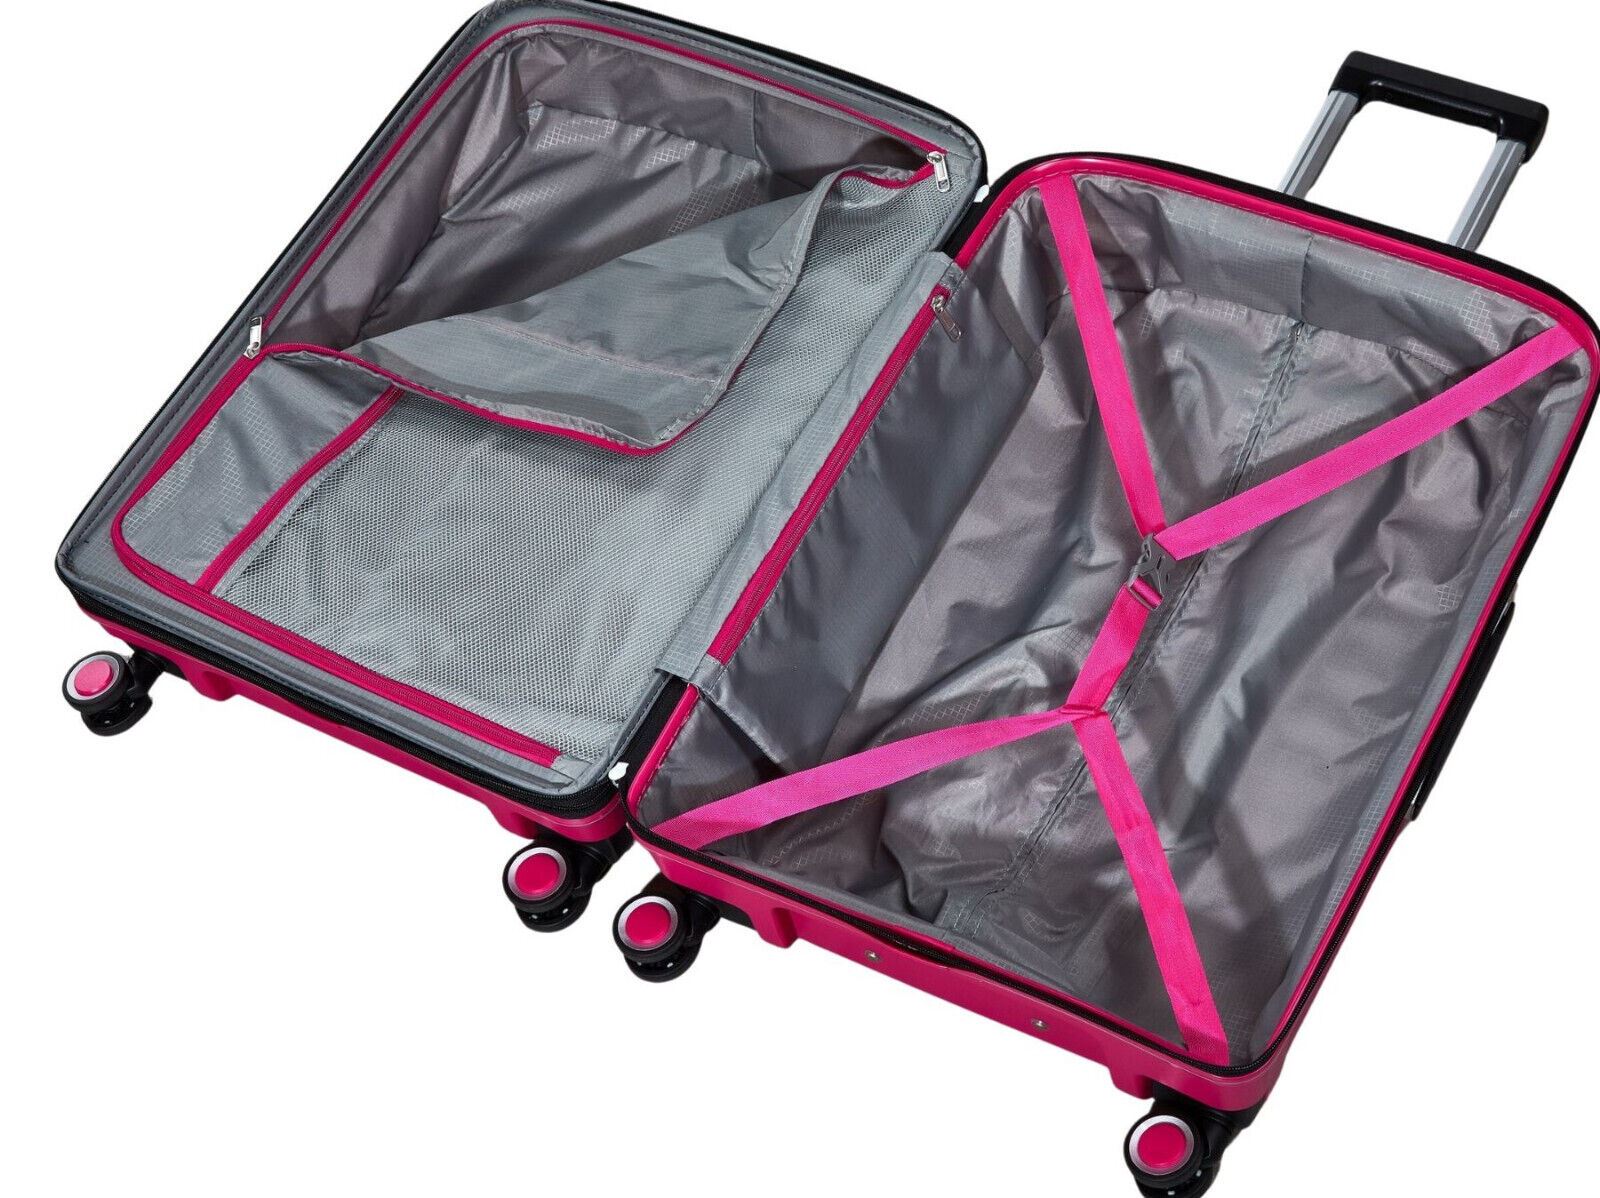 Altoona Cabin Hard Shell Suitcase in Pink